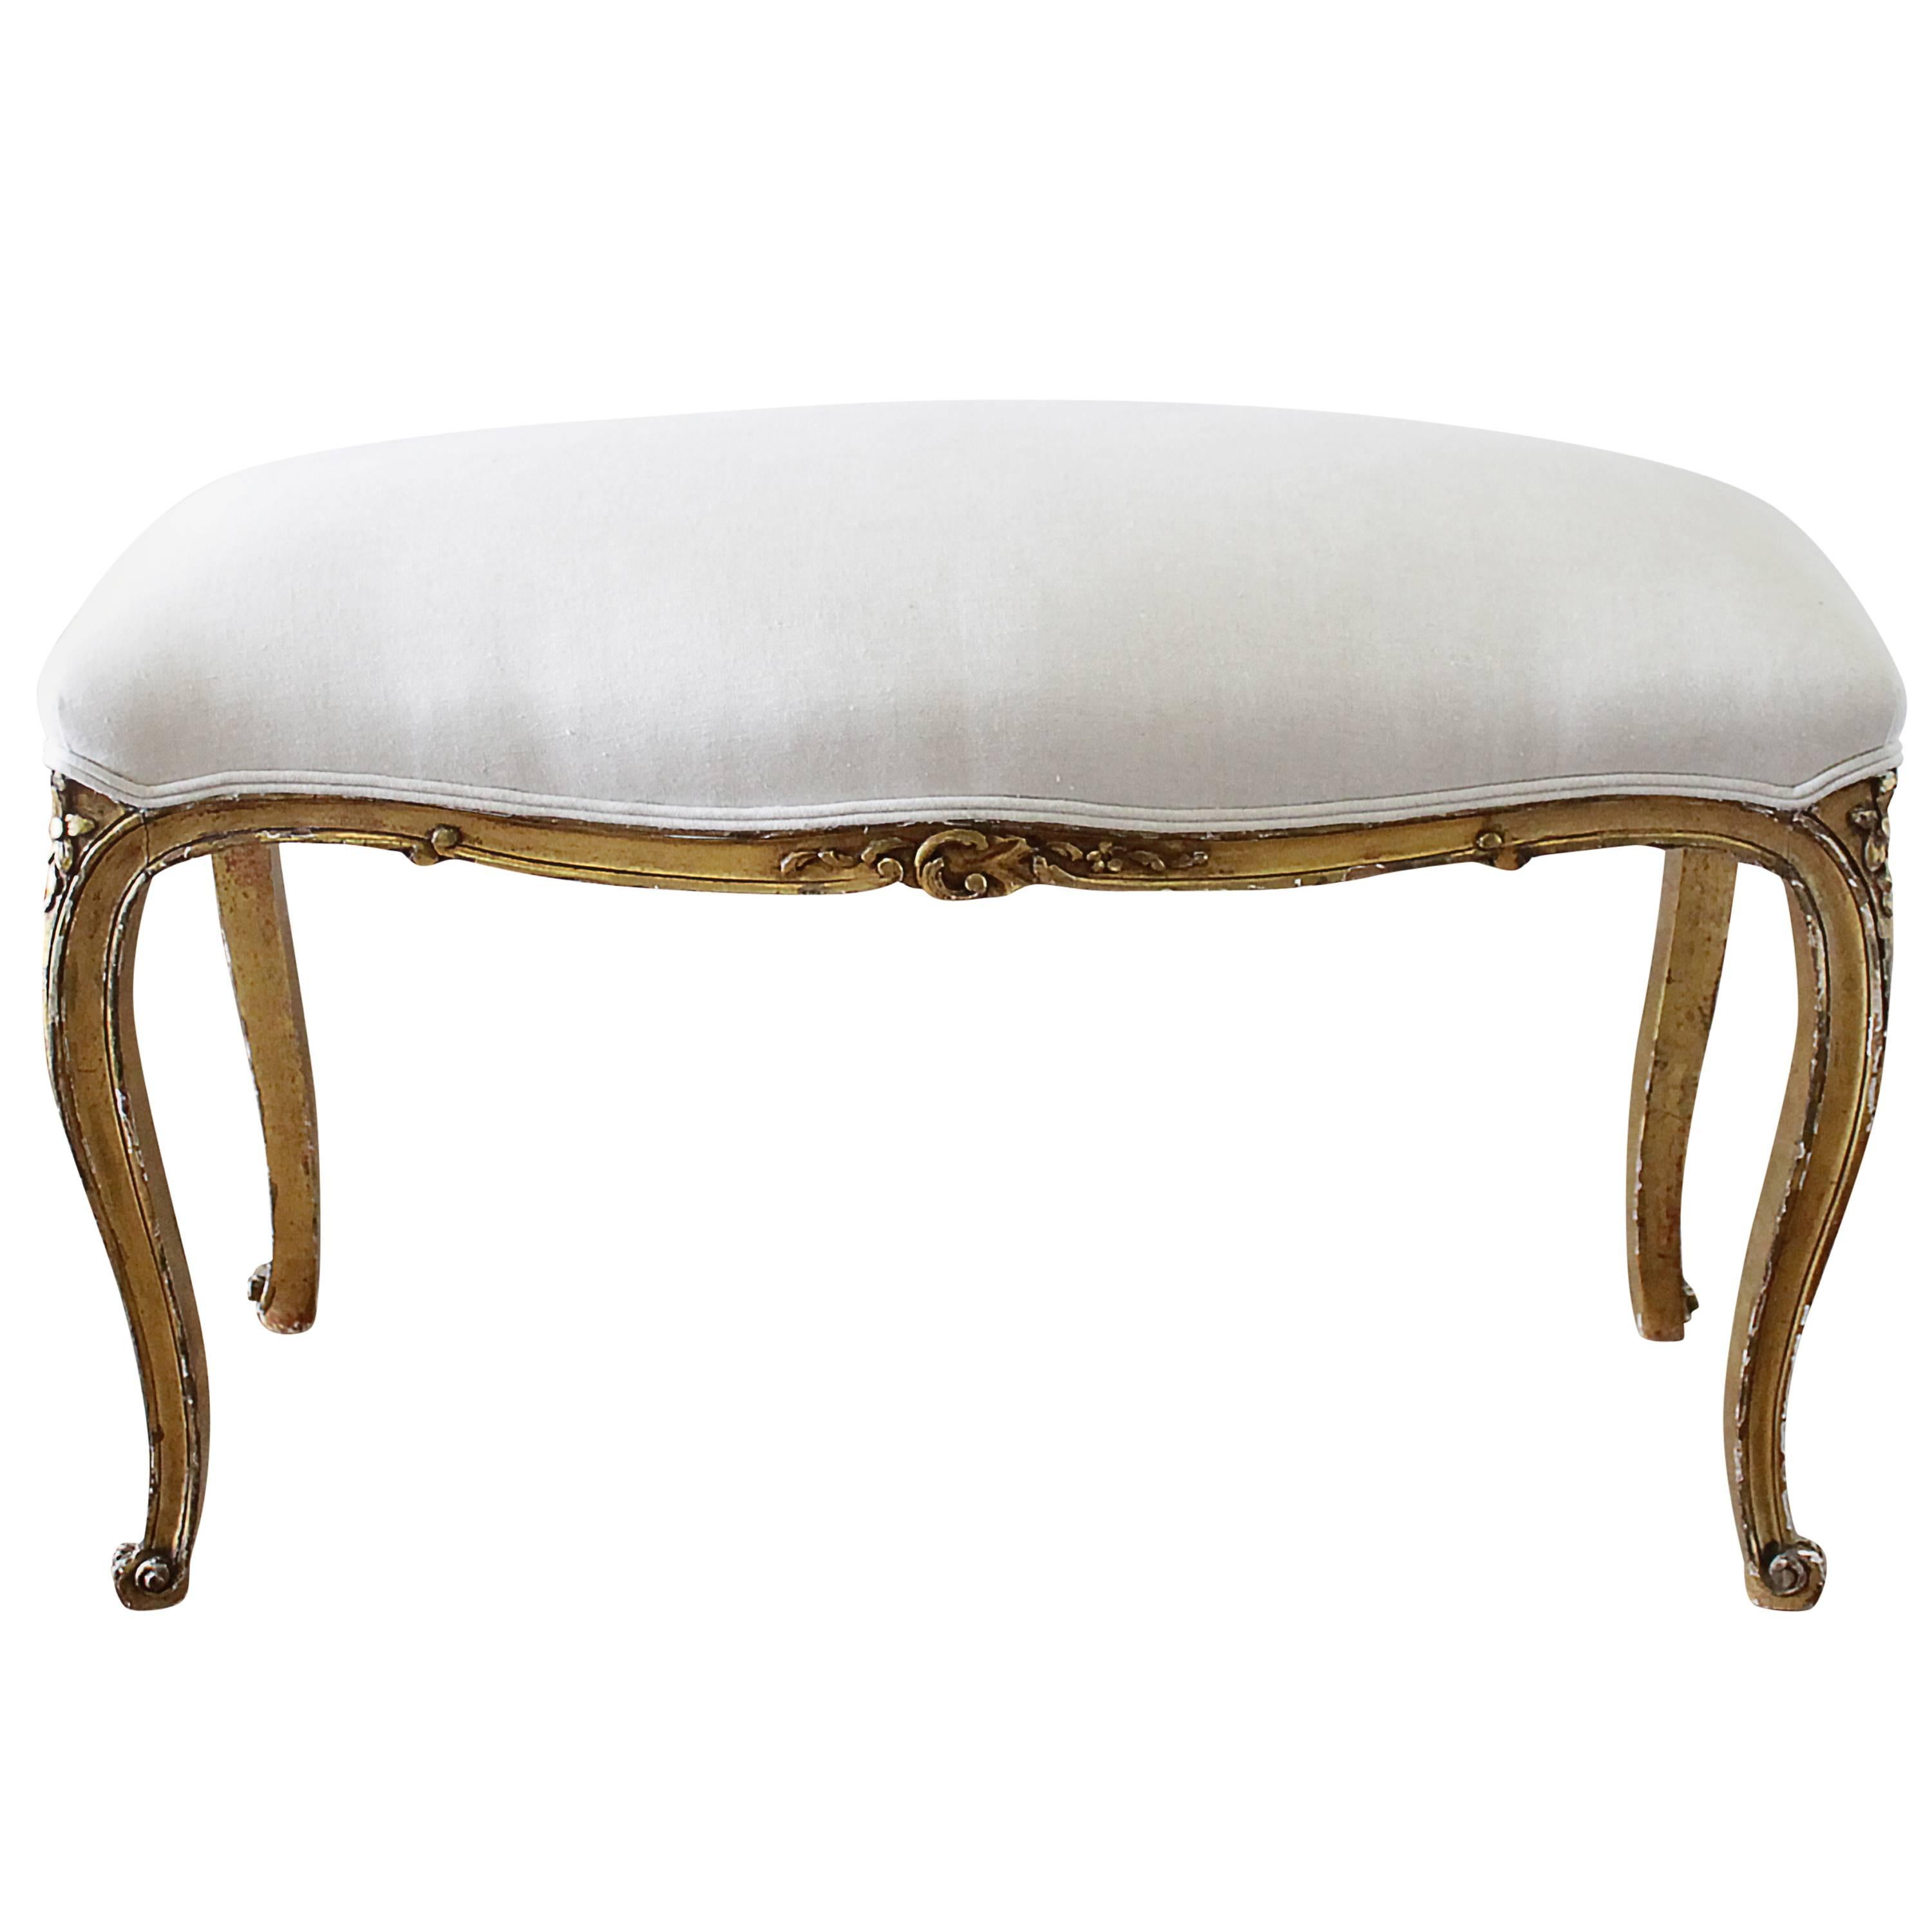 Elegant Carved Louis XV Style Giltwood Bench Upholstered in Linen